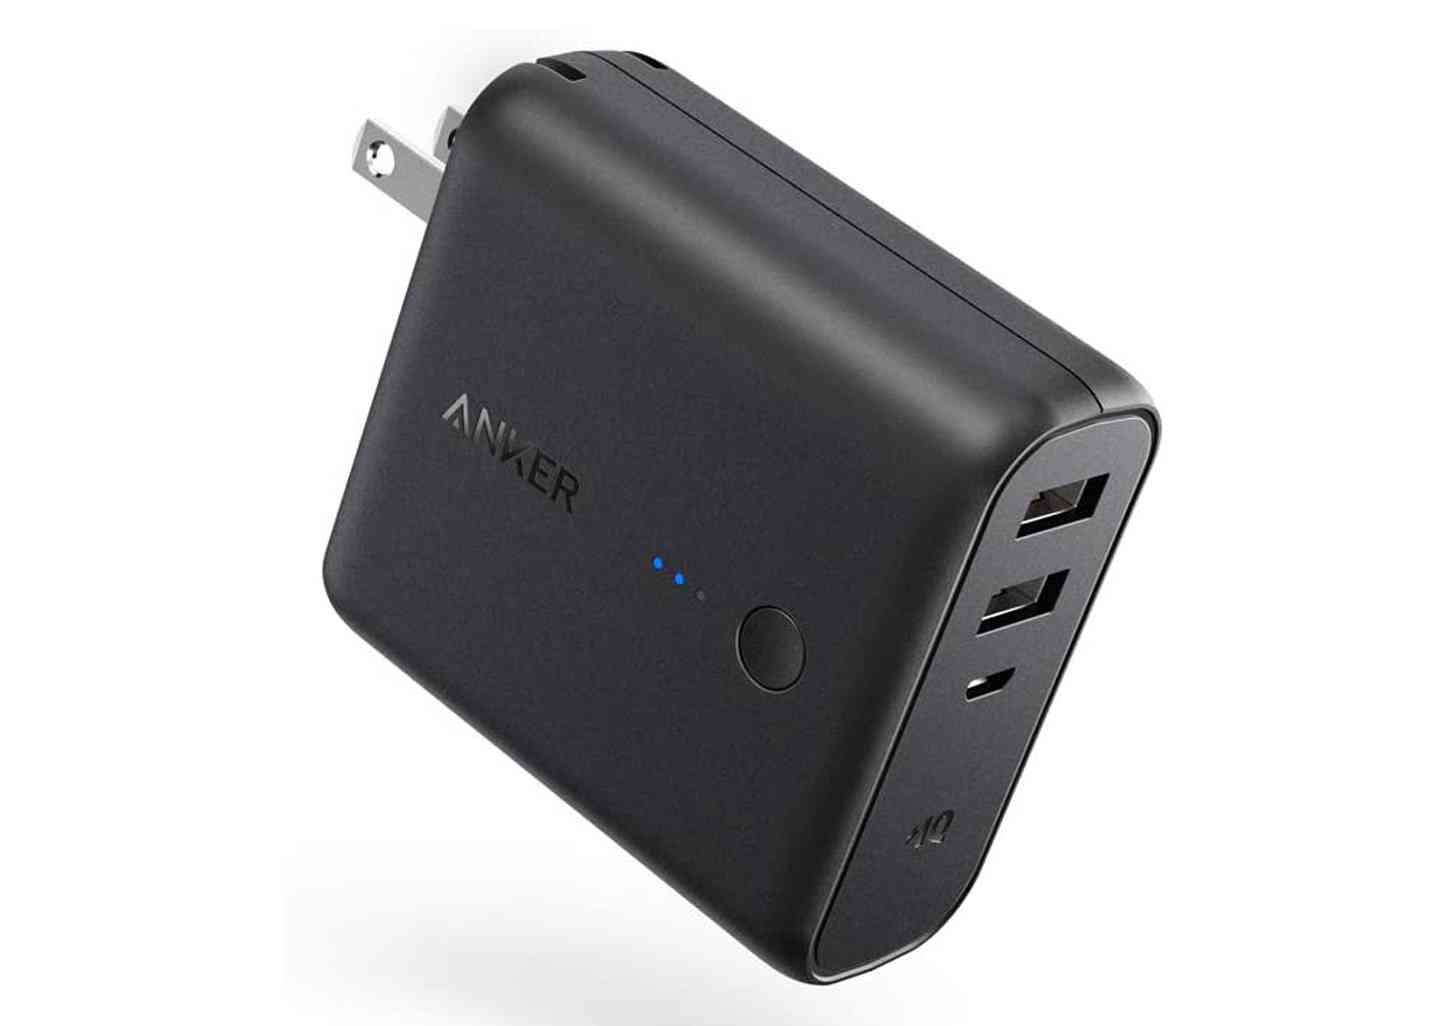 Anker PowerCore Fusion charger